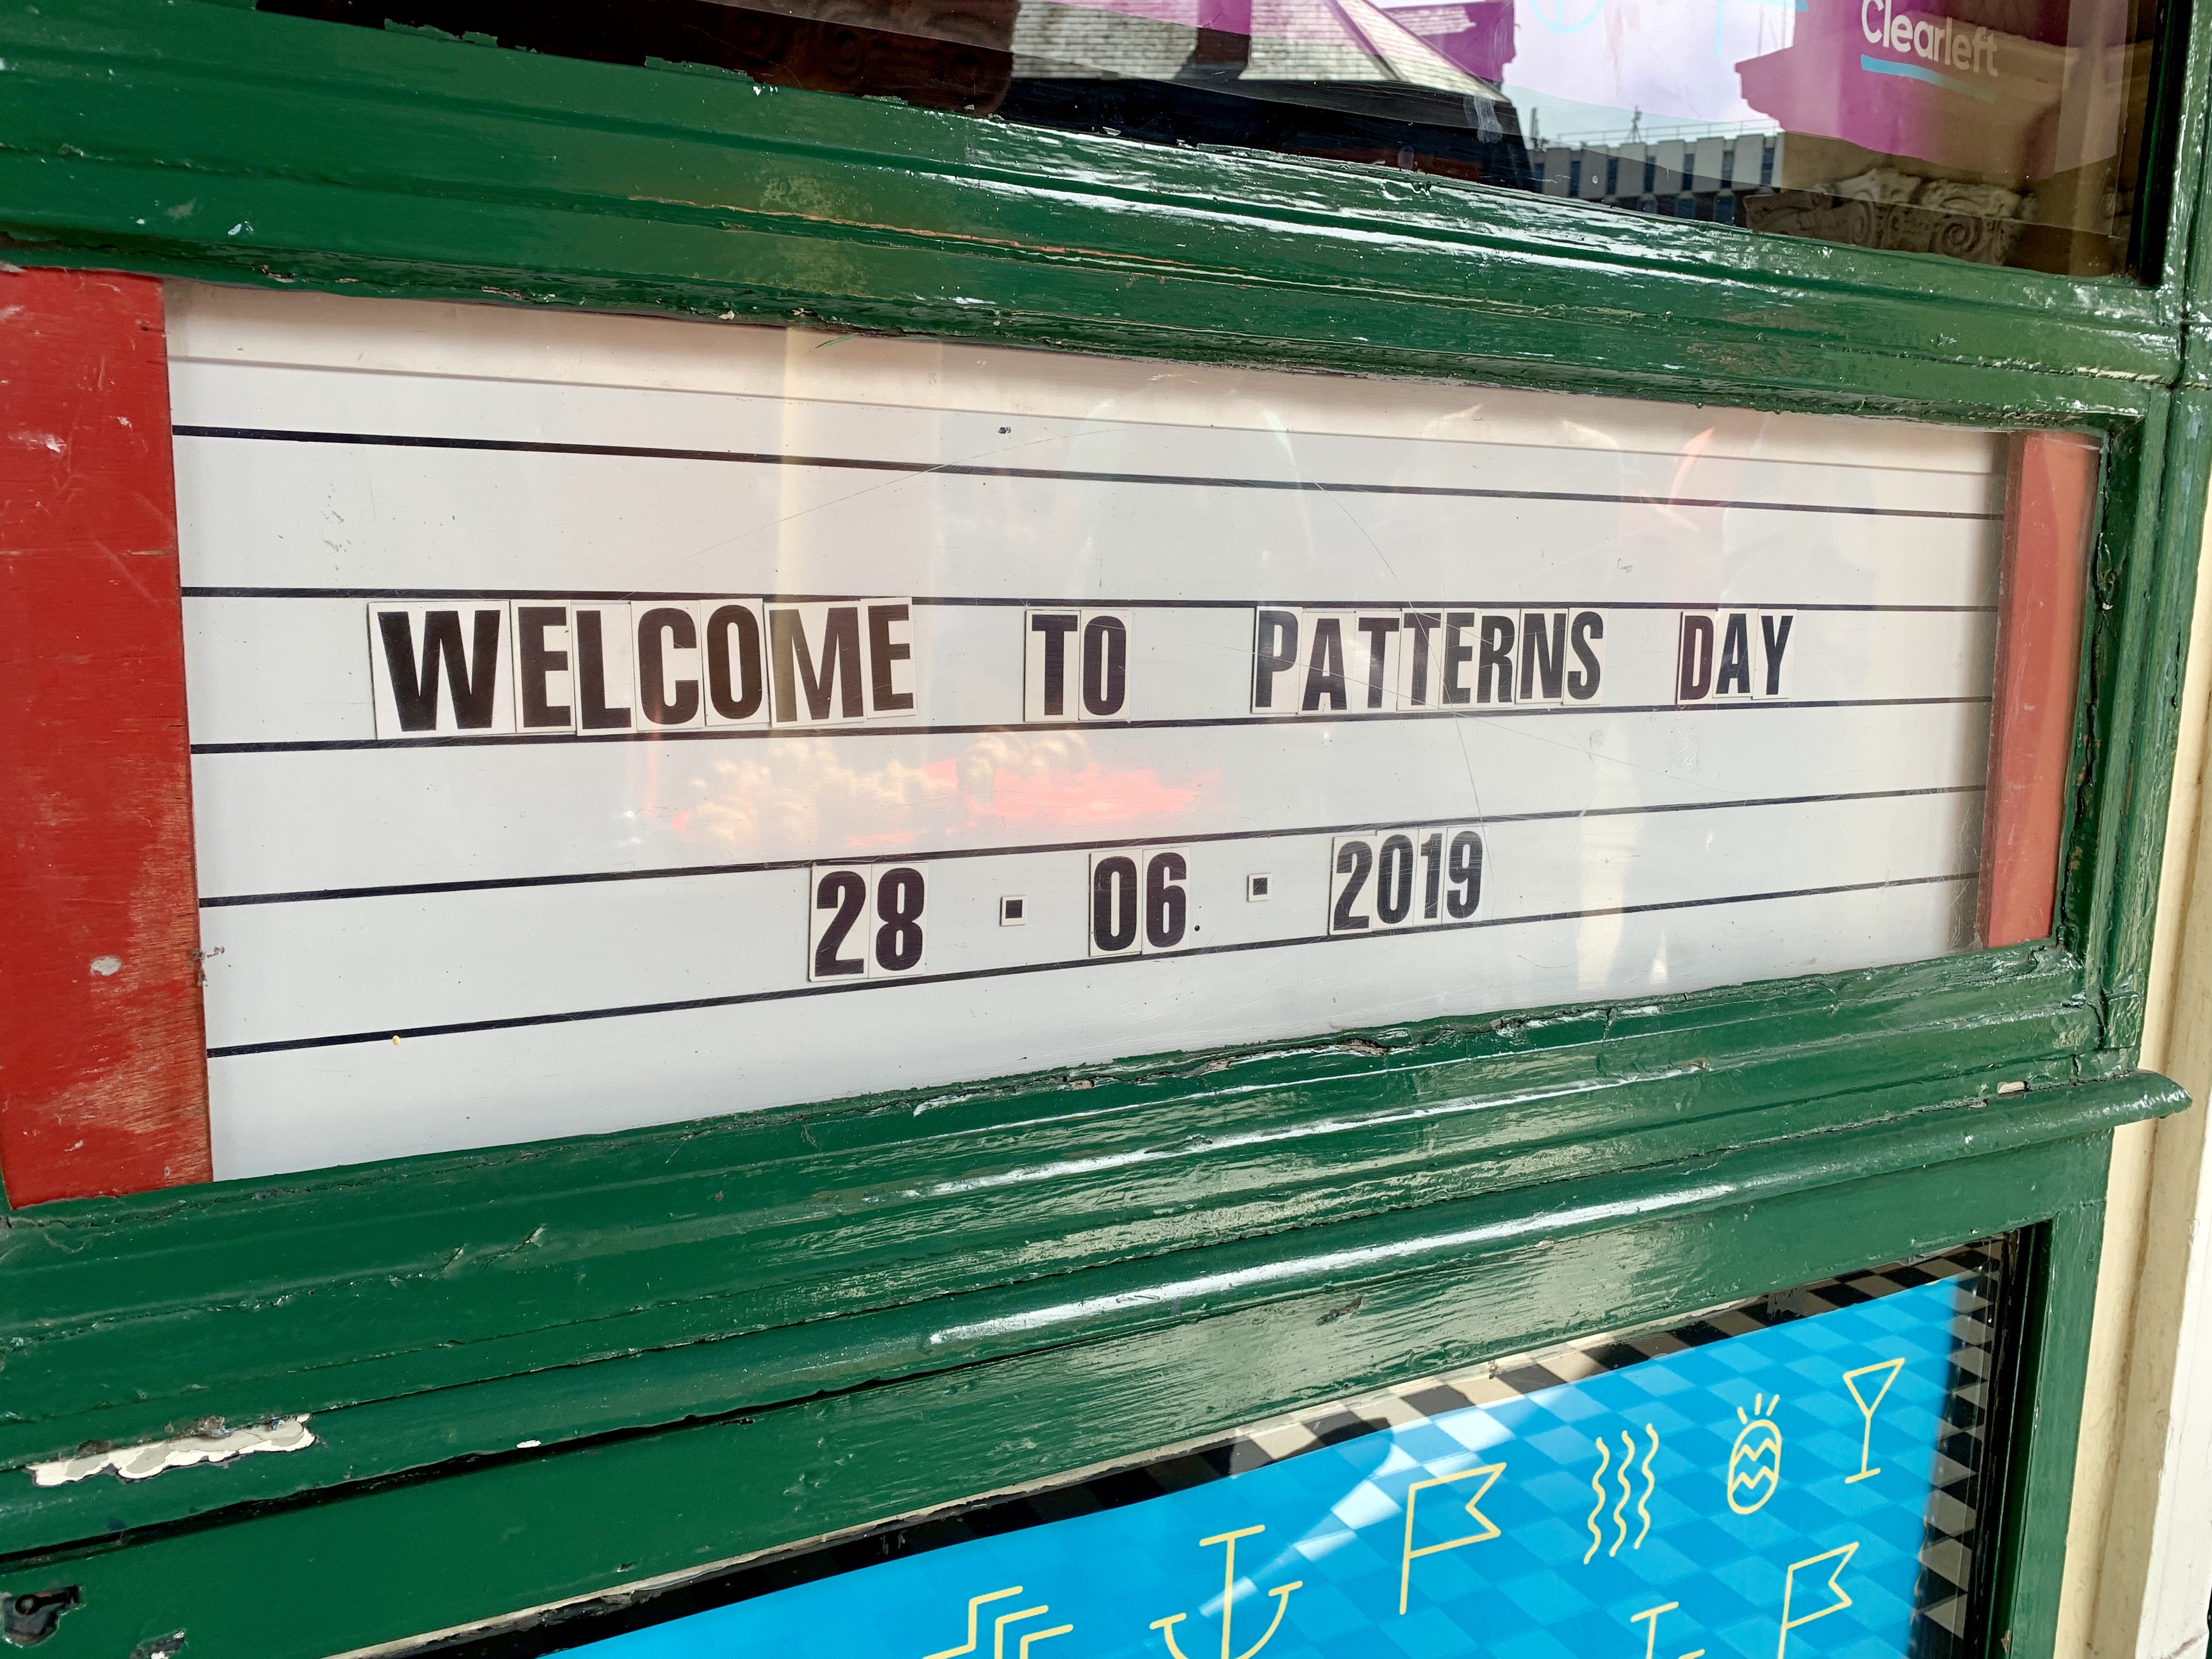 Welcome to Patterns Day signage